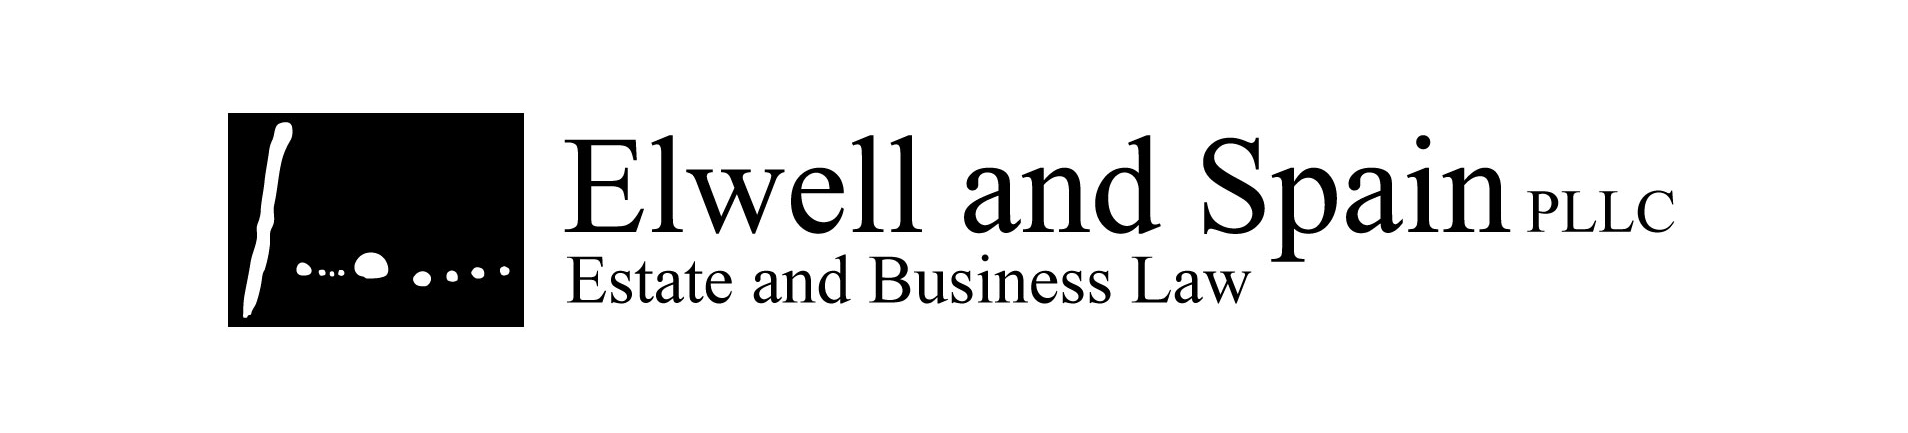 Elwell and Spain, PLLC | Norman, Oklahoma Estate Planning Law Office